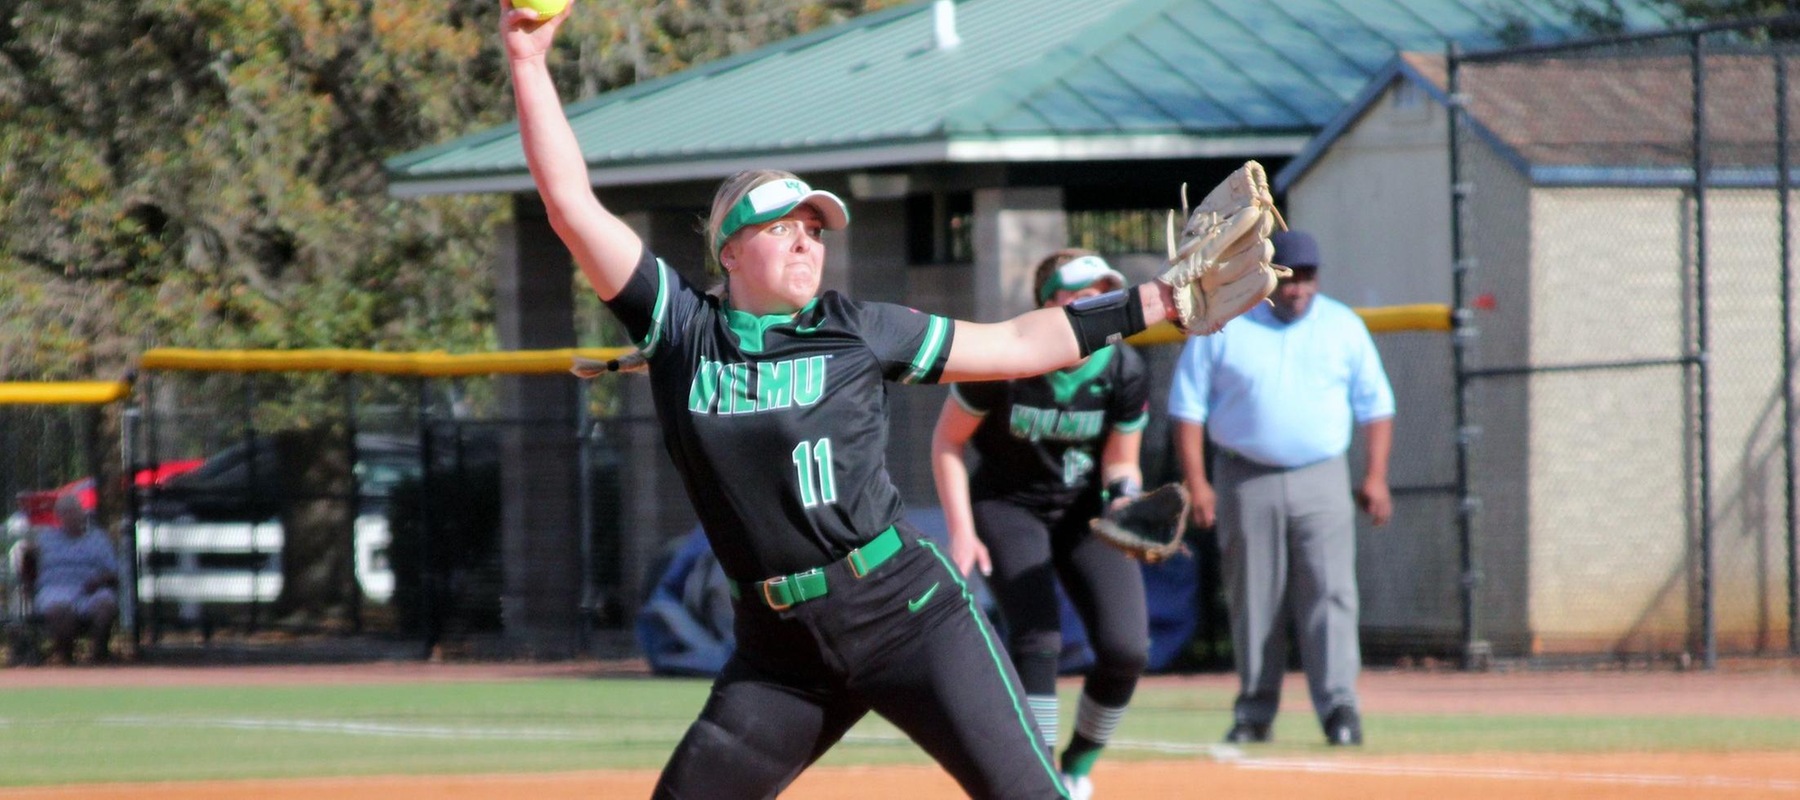 Photo of Kylee Gunkel who struck out three batters in a complete game shutout in her collegiate debut at Rollins. Copyright 2022; Wilmington University. All rights reserved. Photo by Erin Harvey. February 27 at Rollins.